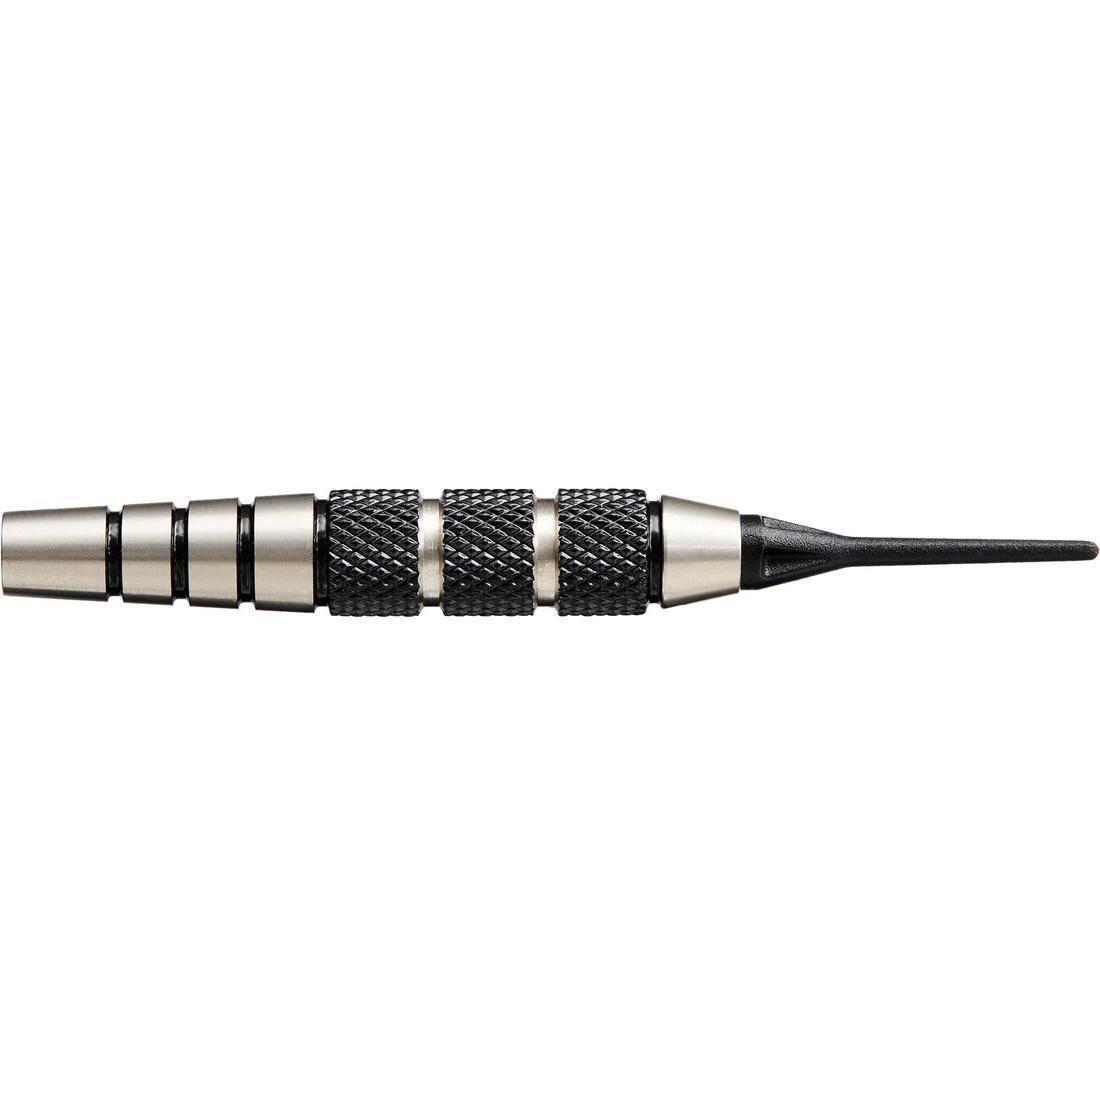 CANAVERAL - S560 Soft Tip Darts Tri-Pack